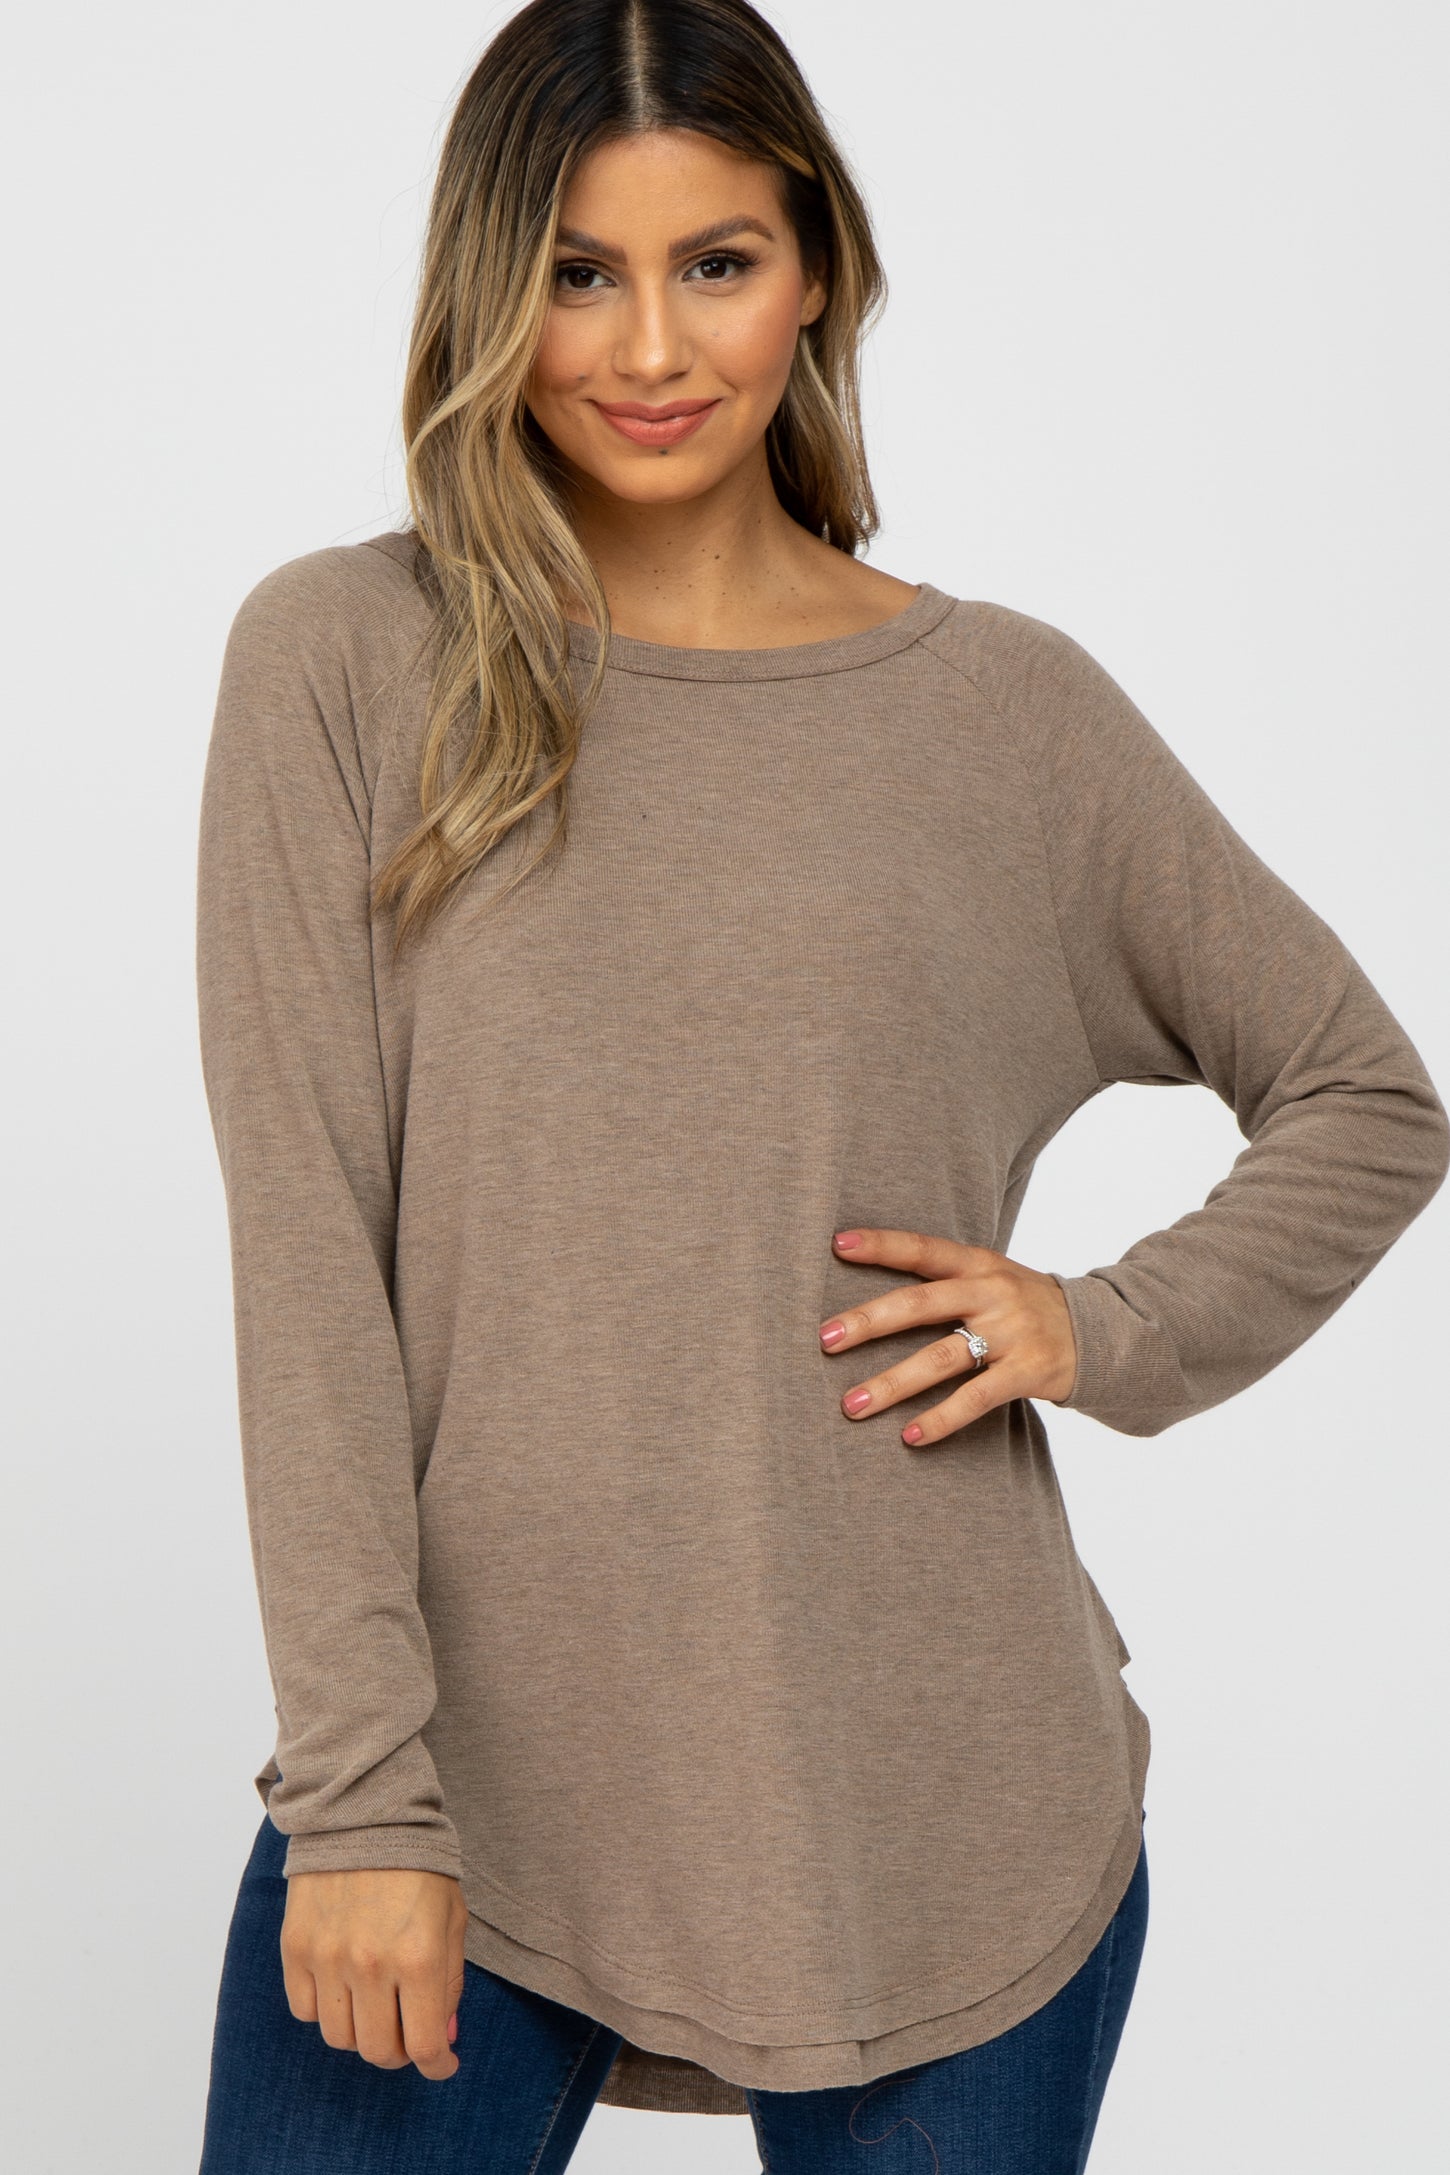 Taupe Hi-Low Rounded Raw Edge Hem Maternity Top